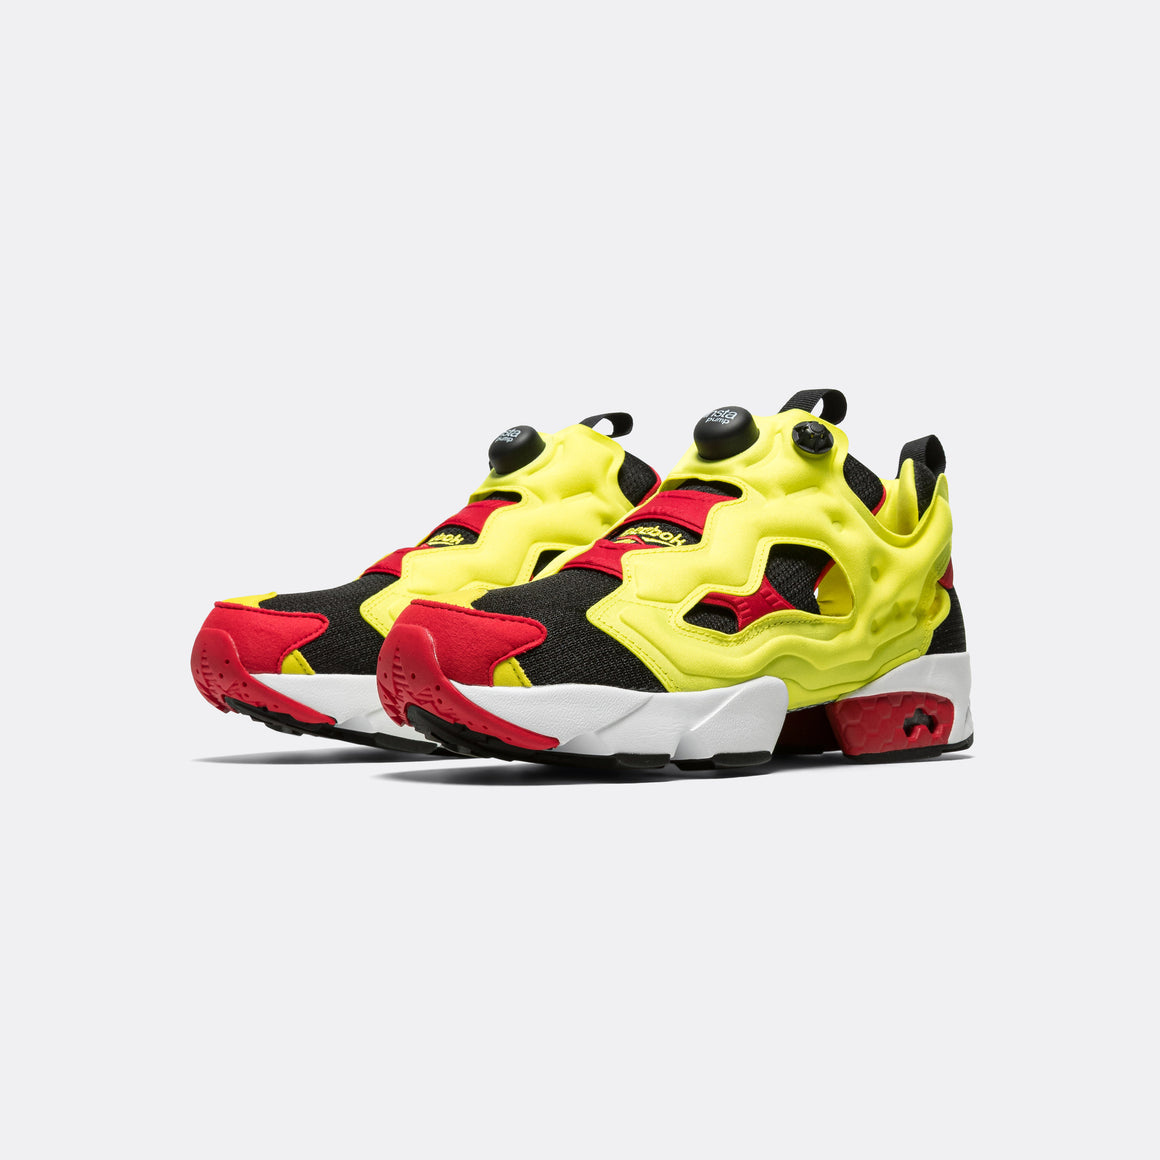 Reebok - Instapump Fury 94 - Hypergreen/Vector Red-Black - UP THERE